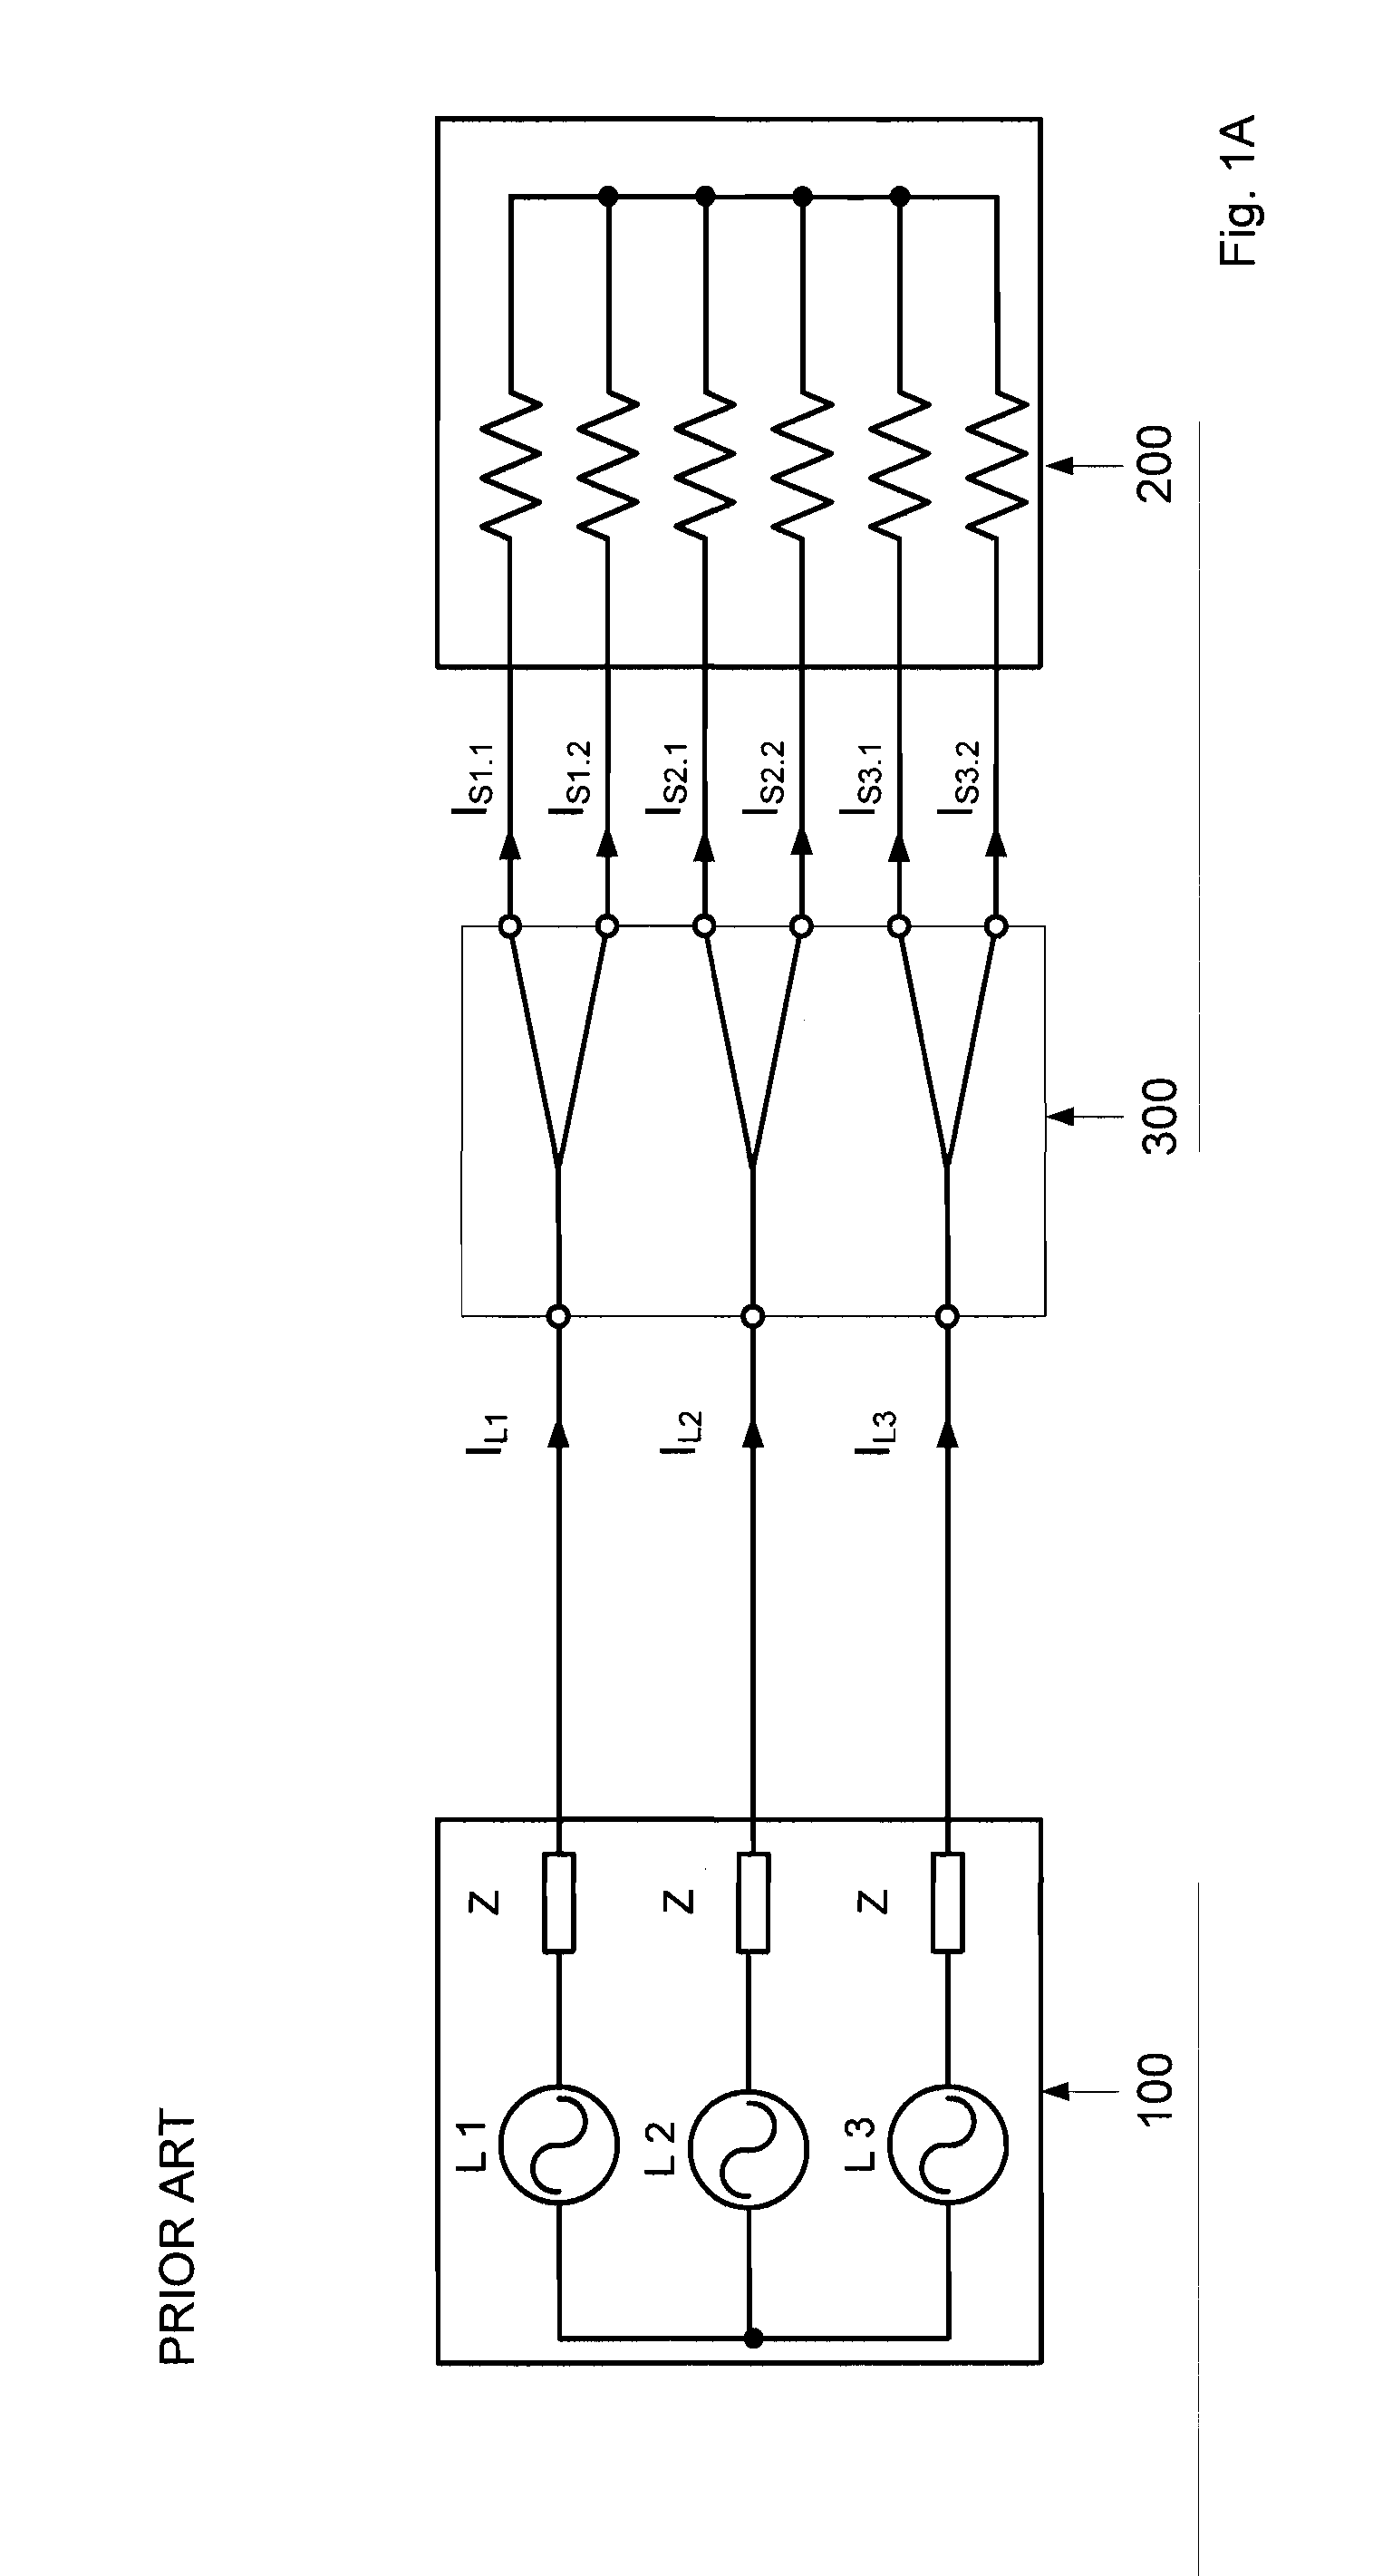 Harmonic cancelling interphase magnetic device